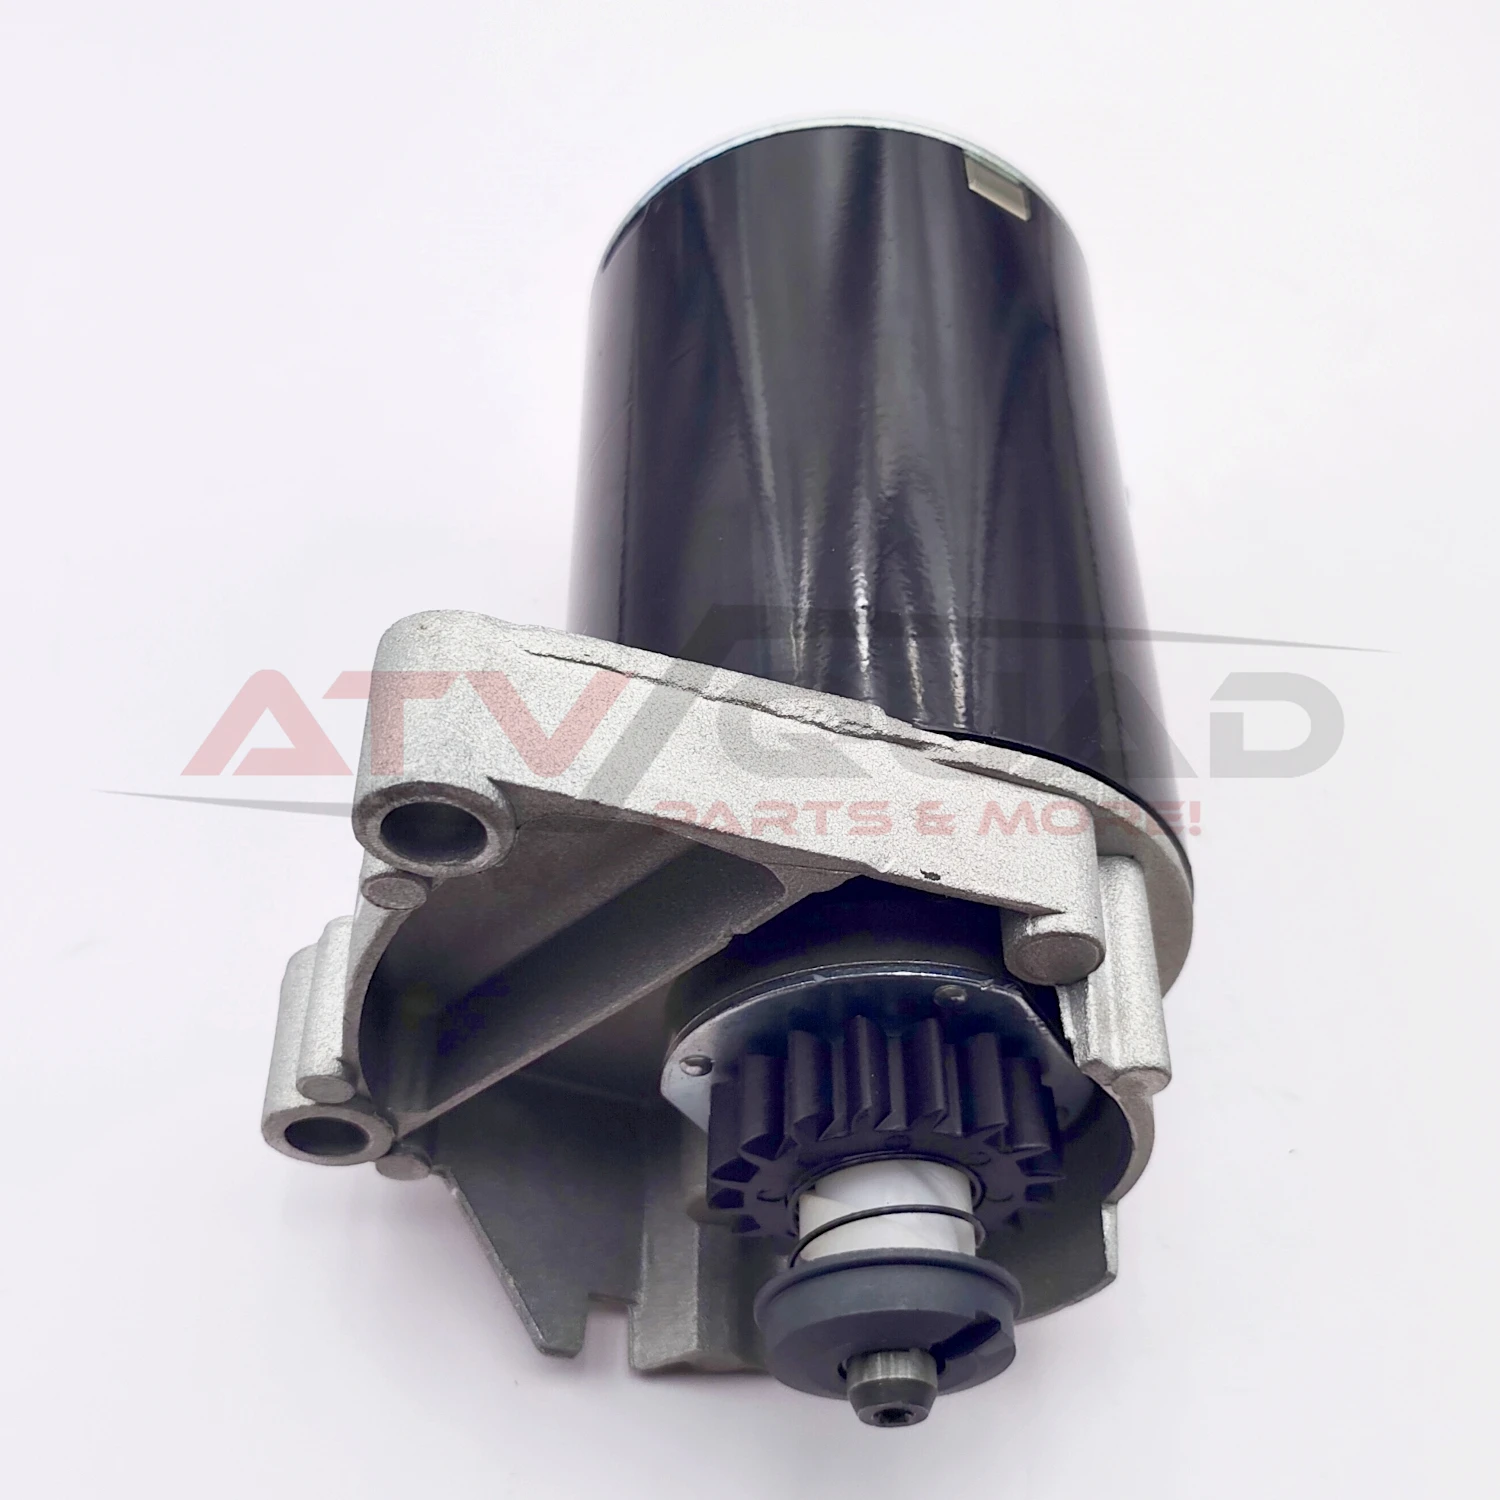 Starter Motor for Briggs and Stratton 498148 495100 399928 Briggs & Stratton 14HP 16HP 18HP 5744n 422700-422799 42A700-42A799